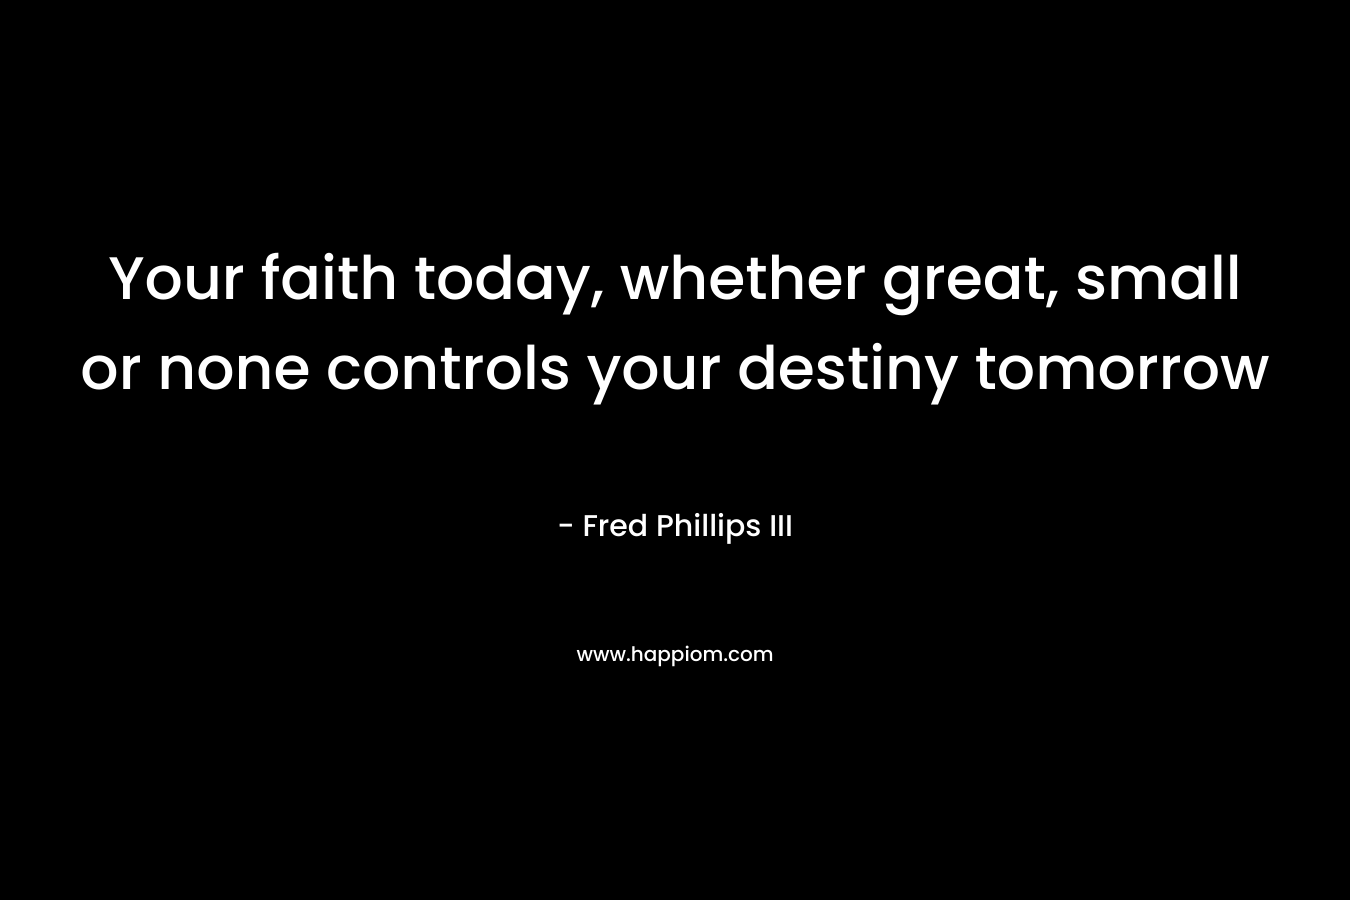 Your faith today, whether great, small or none controls your destiny tomorrow – Fred Phillips III